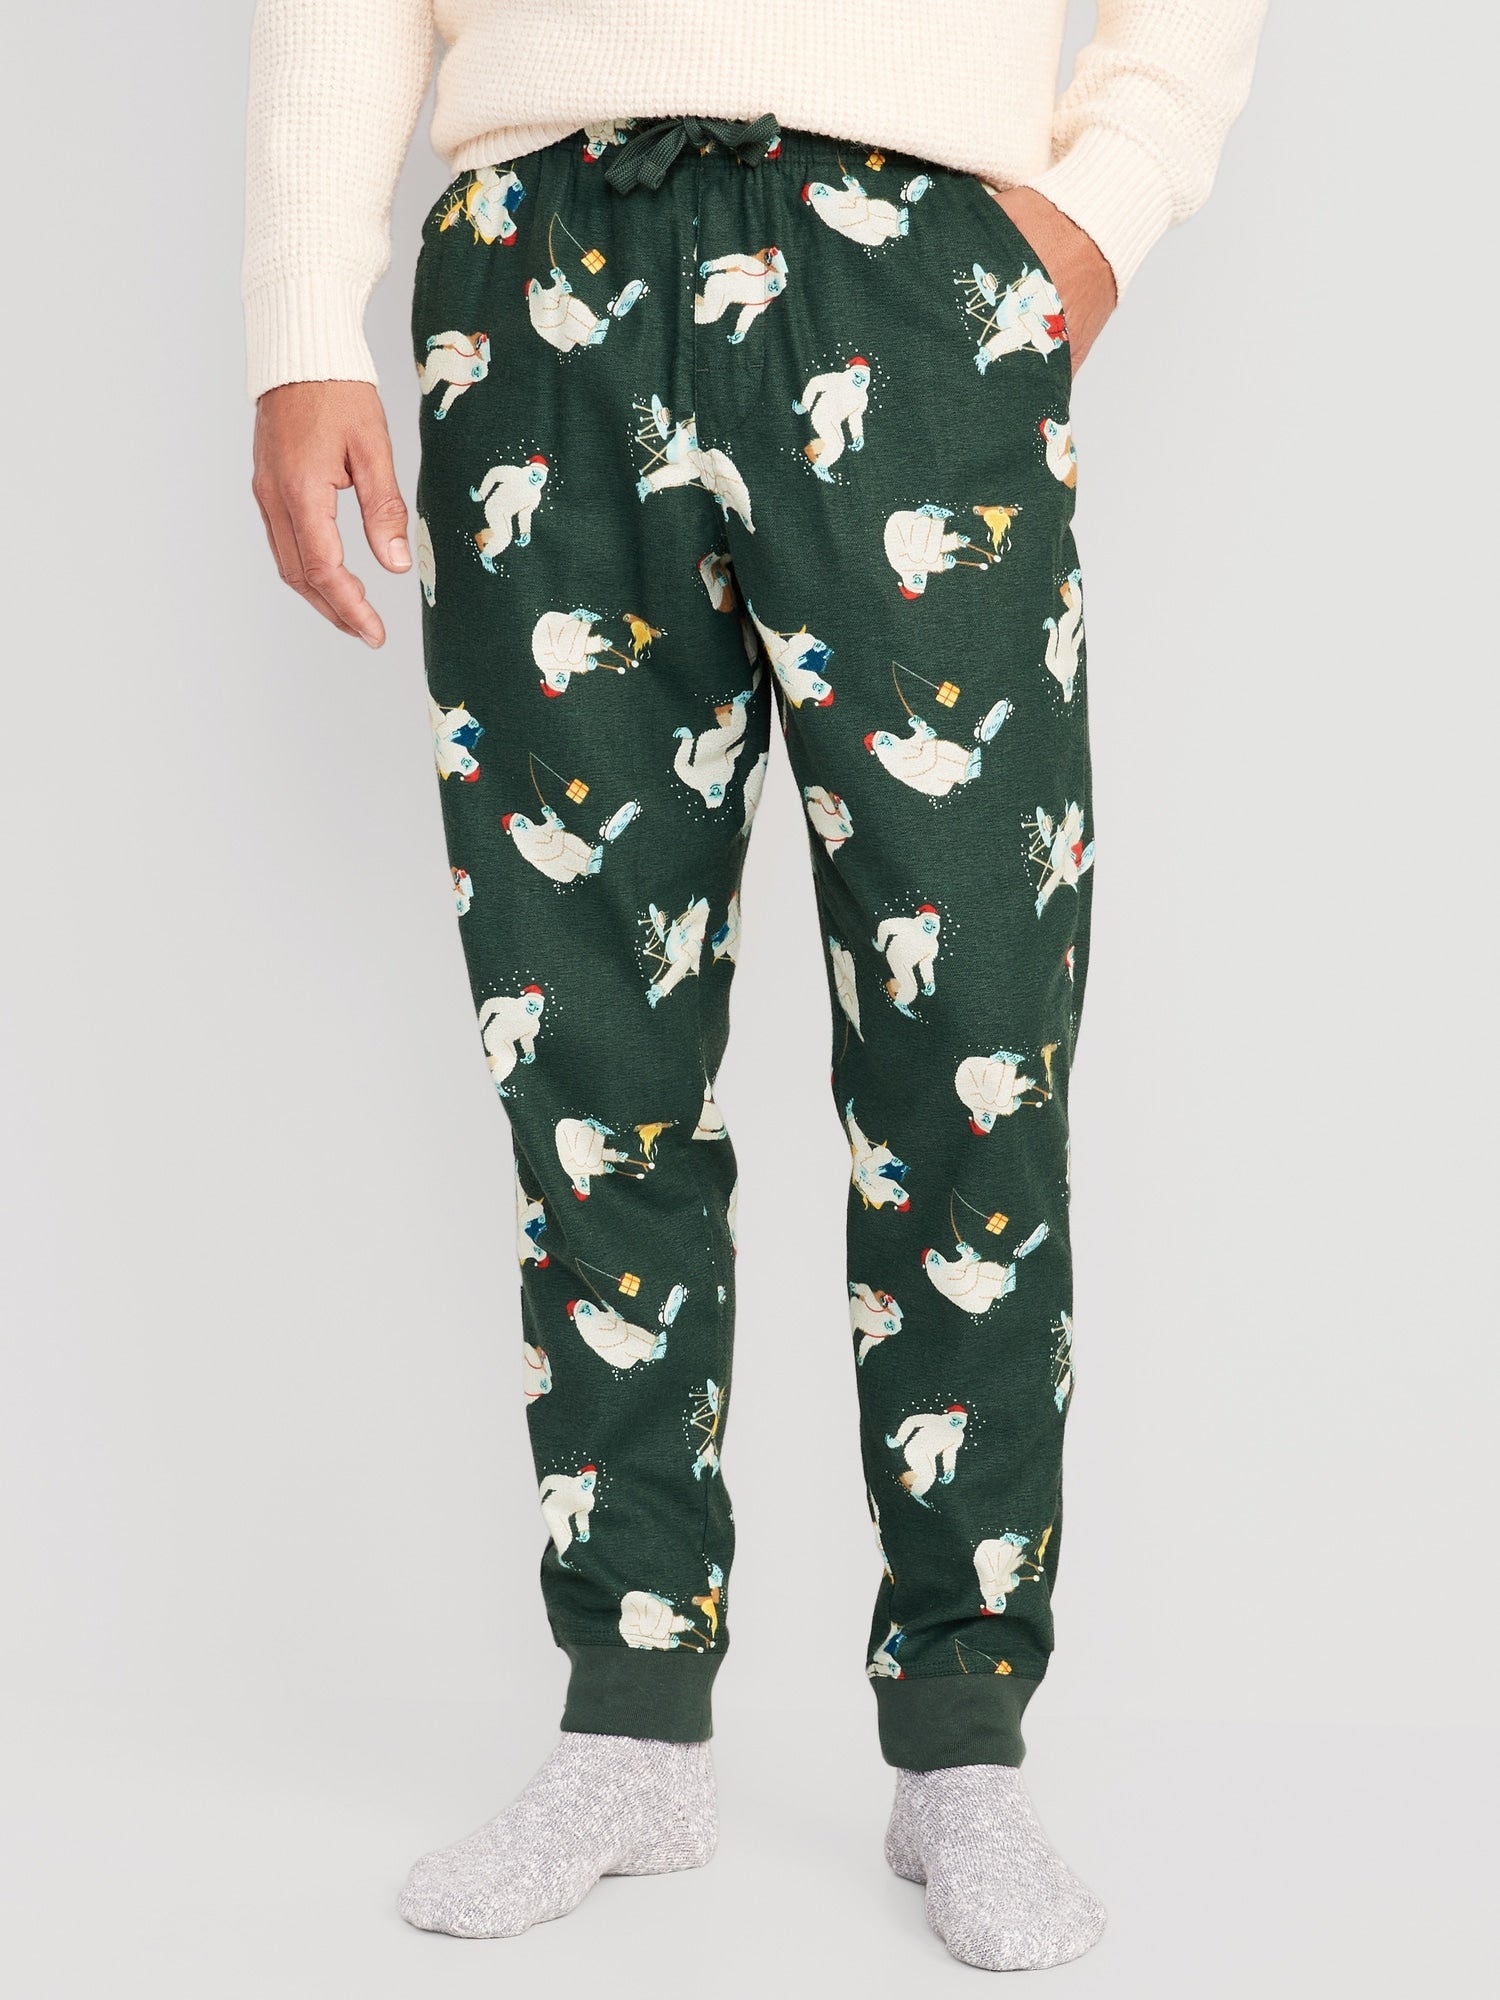 Matching Printed Flannel Jogger Pajama Pants for Men – Search By Inseam